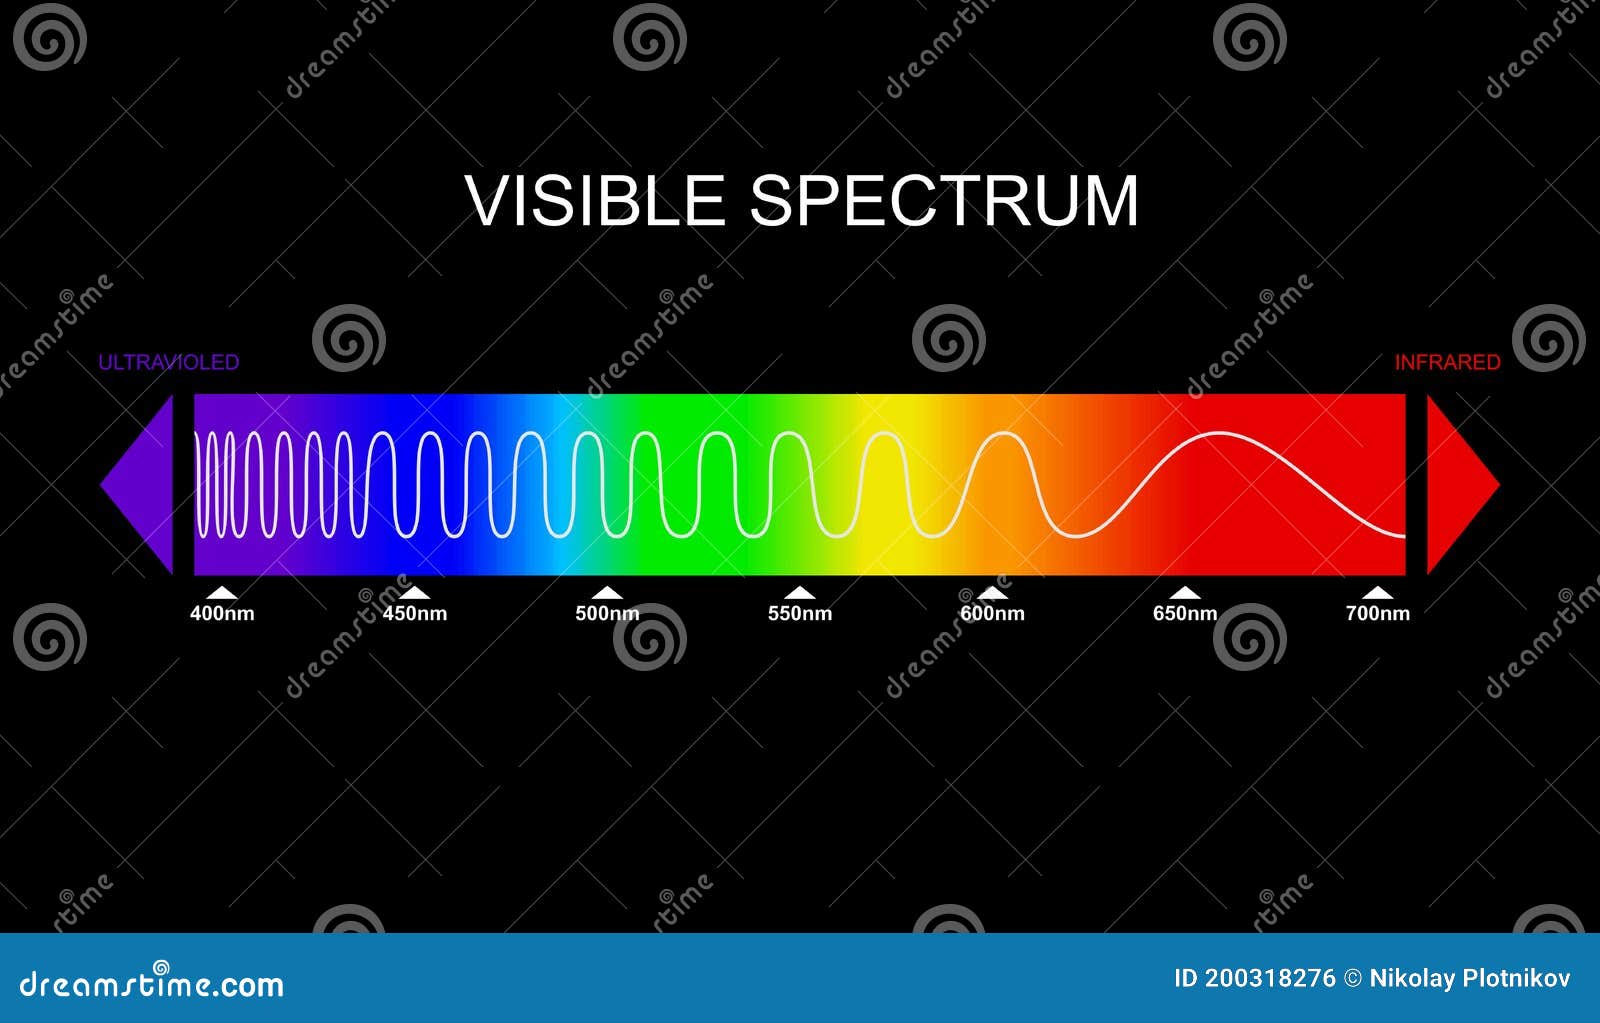 spectrum, visible light diagram. portion of the electromagnetic spectrum that is visible to the human eye. color